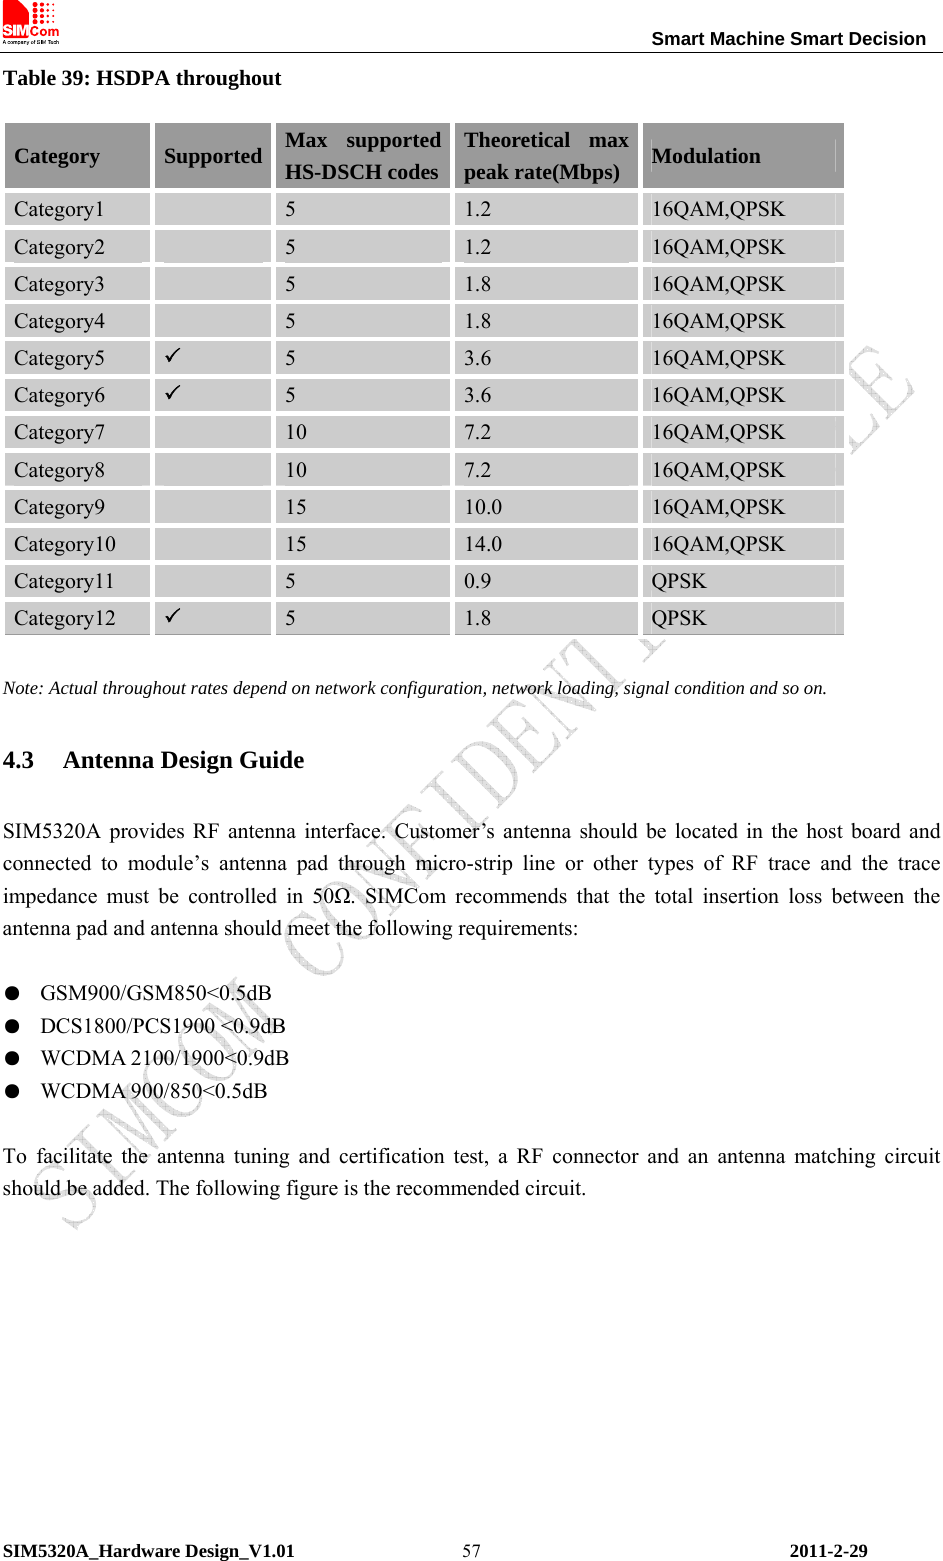                                                                Smart Machine Smart Decision SIM5320A_Hardware Design_V1.01   2011-2-29 57Table 39: HSDPA throughout Category Supported Max supported HS-DSCH codesTheoretical max peak rate(Mbps) Modulation Category1   5  1.2  16QAM,QPSK Category2   5  1.2  16QAM,QPSK Category3   5  1.8  16QAM,QPSK Category4   5  1.8  16QAM,QPSK Category5  3 5  3.6  16QAM,QPSK Category6  3 5  3.6  16QAM,QPSK Category7   10  7.2  16QAM,QPSK Category8   10  7.2  16QAM,QPSK Category9   15  10.0  16QAM,QPSK Category10   15  14.0  16QAM,QPSK Category11   5  0.9  QPSK Category12  3 5  1.8  QPSK  Note: Actual throughout rates depend on network configuration, network loading, signal condition and so on. 4.3 Antenna Design Guide SIM5320A provides RF antenna interface. Customer’s antenna should be located in the host board and connected to module’s antenna pad through micro-strip line or other types of RF trace and the trace impedance must be controlled in 50Ω. SIMCom recommends that the total insertion loss between the antenna pad and antenna should meet the following requirements:  ●  GSM900/GSM850&lt;0.5dB ●  DCS1800/PCS1900 &lt;0.9dB ●  WCDMA 2100/1900&lt;0.9dB ●  WCDMA 900/850&lt;0.5dB  To facilitate the antenna tuning and certification test, a RF connector and an antenna matching circuit should be added. The following figure is the recommended circuit.  